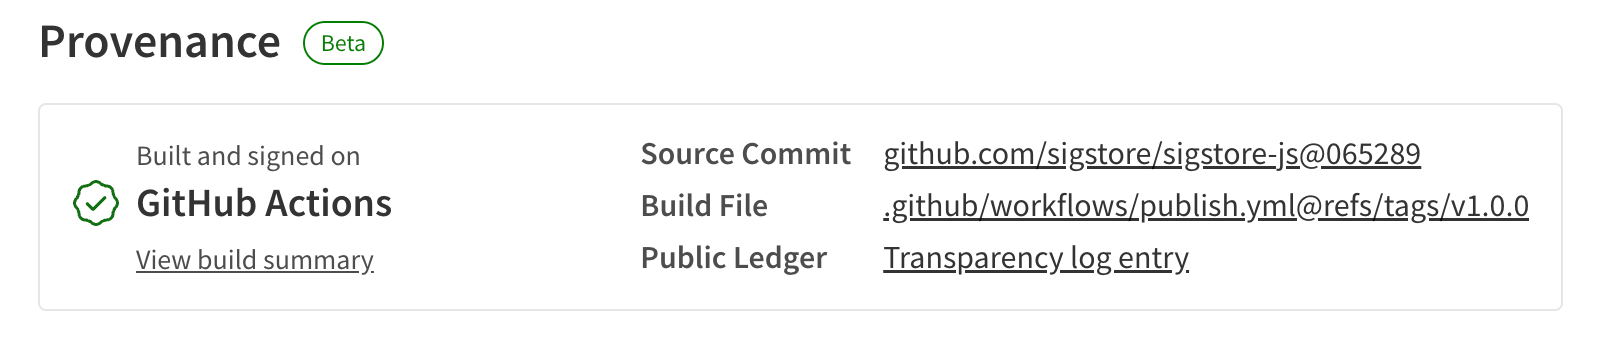 Provenance screenshot from npmjs.com showing the cloud CI/CD system along with links to source code, build instructions, and public ledger